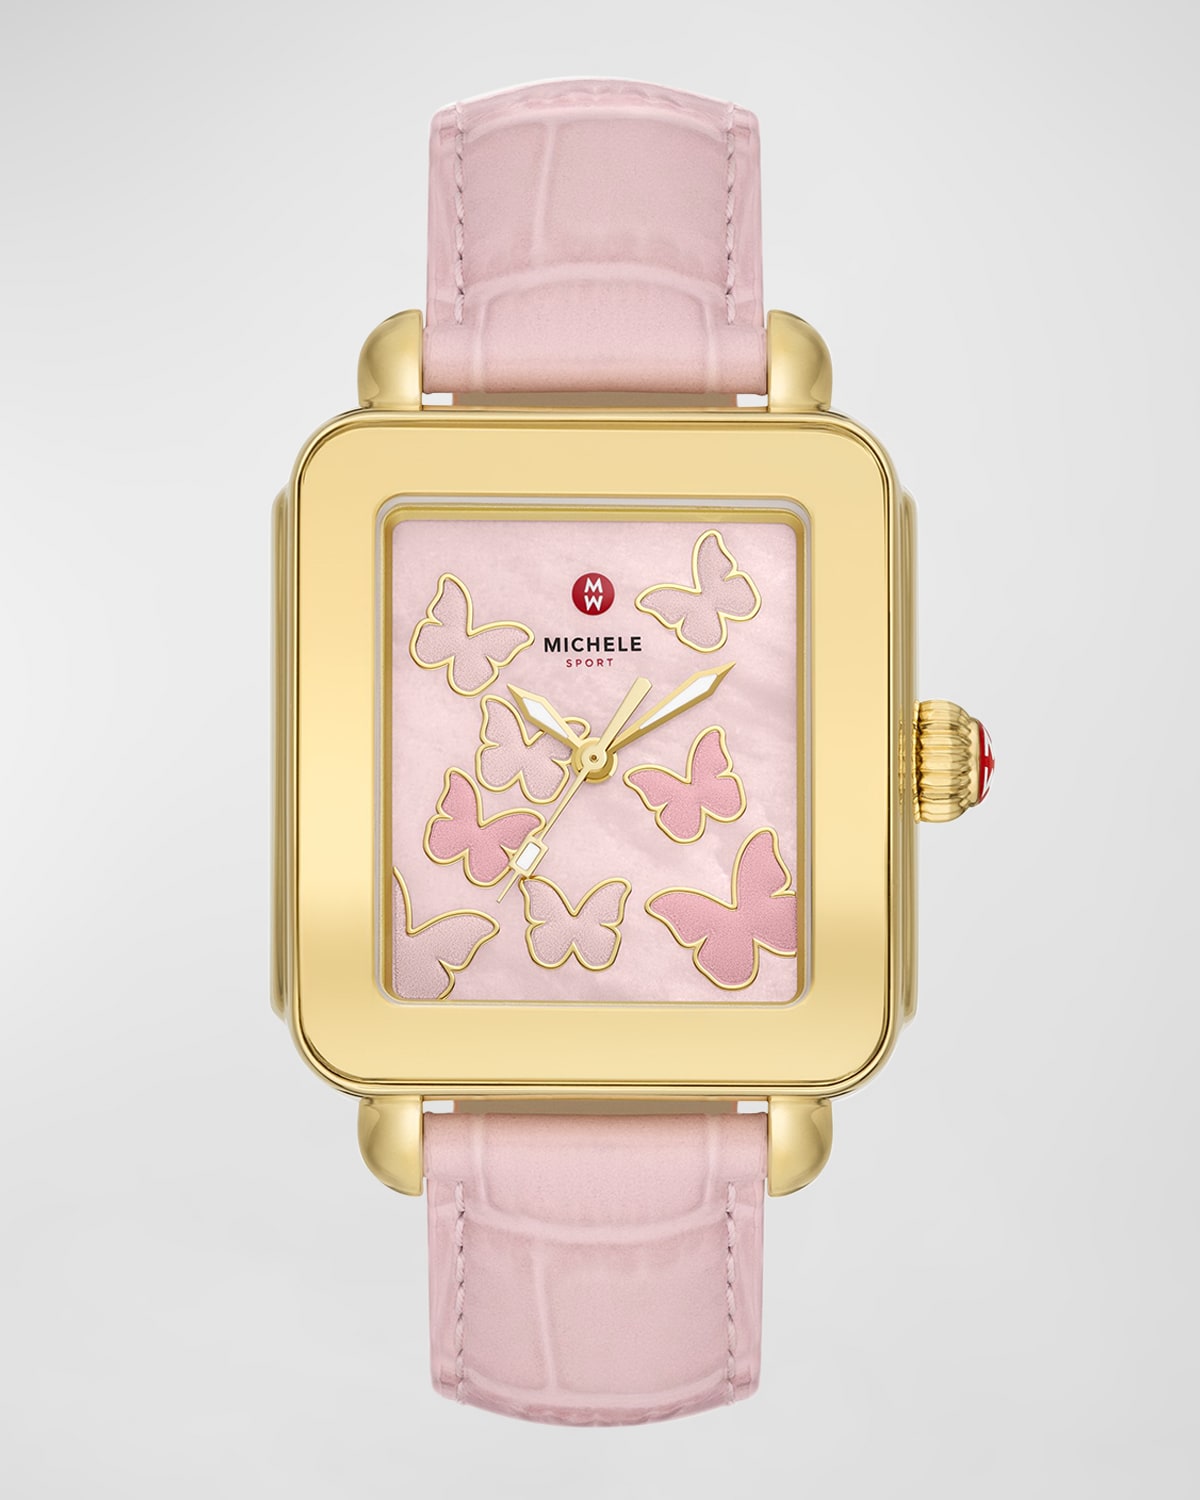 Michele 34mm Deco Sport Butterfly Watch With Leather Strap, Gold/pink